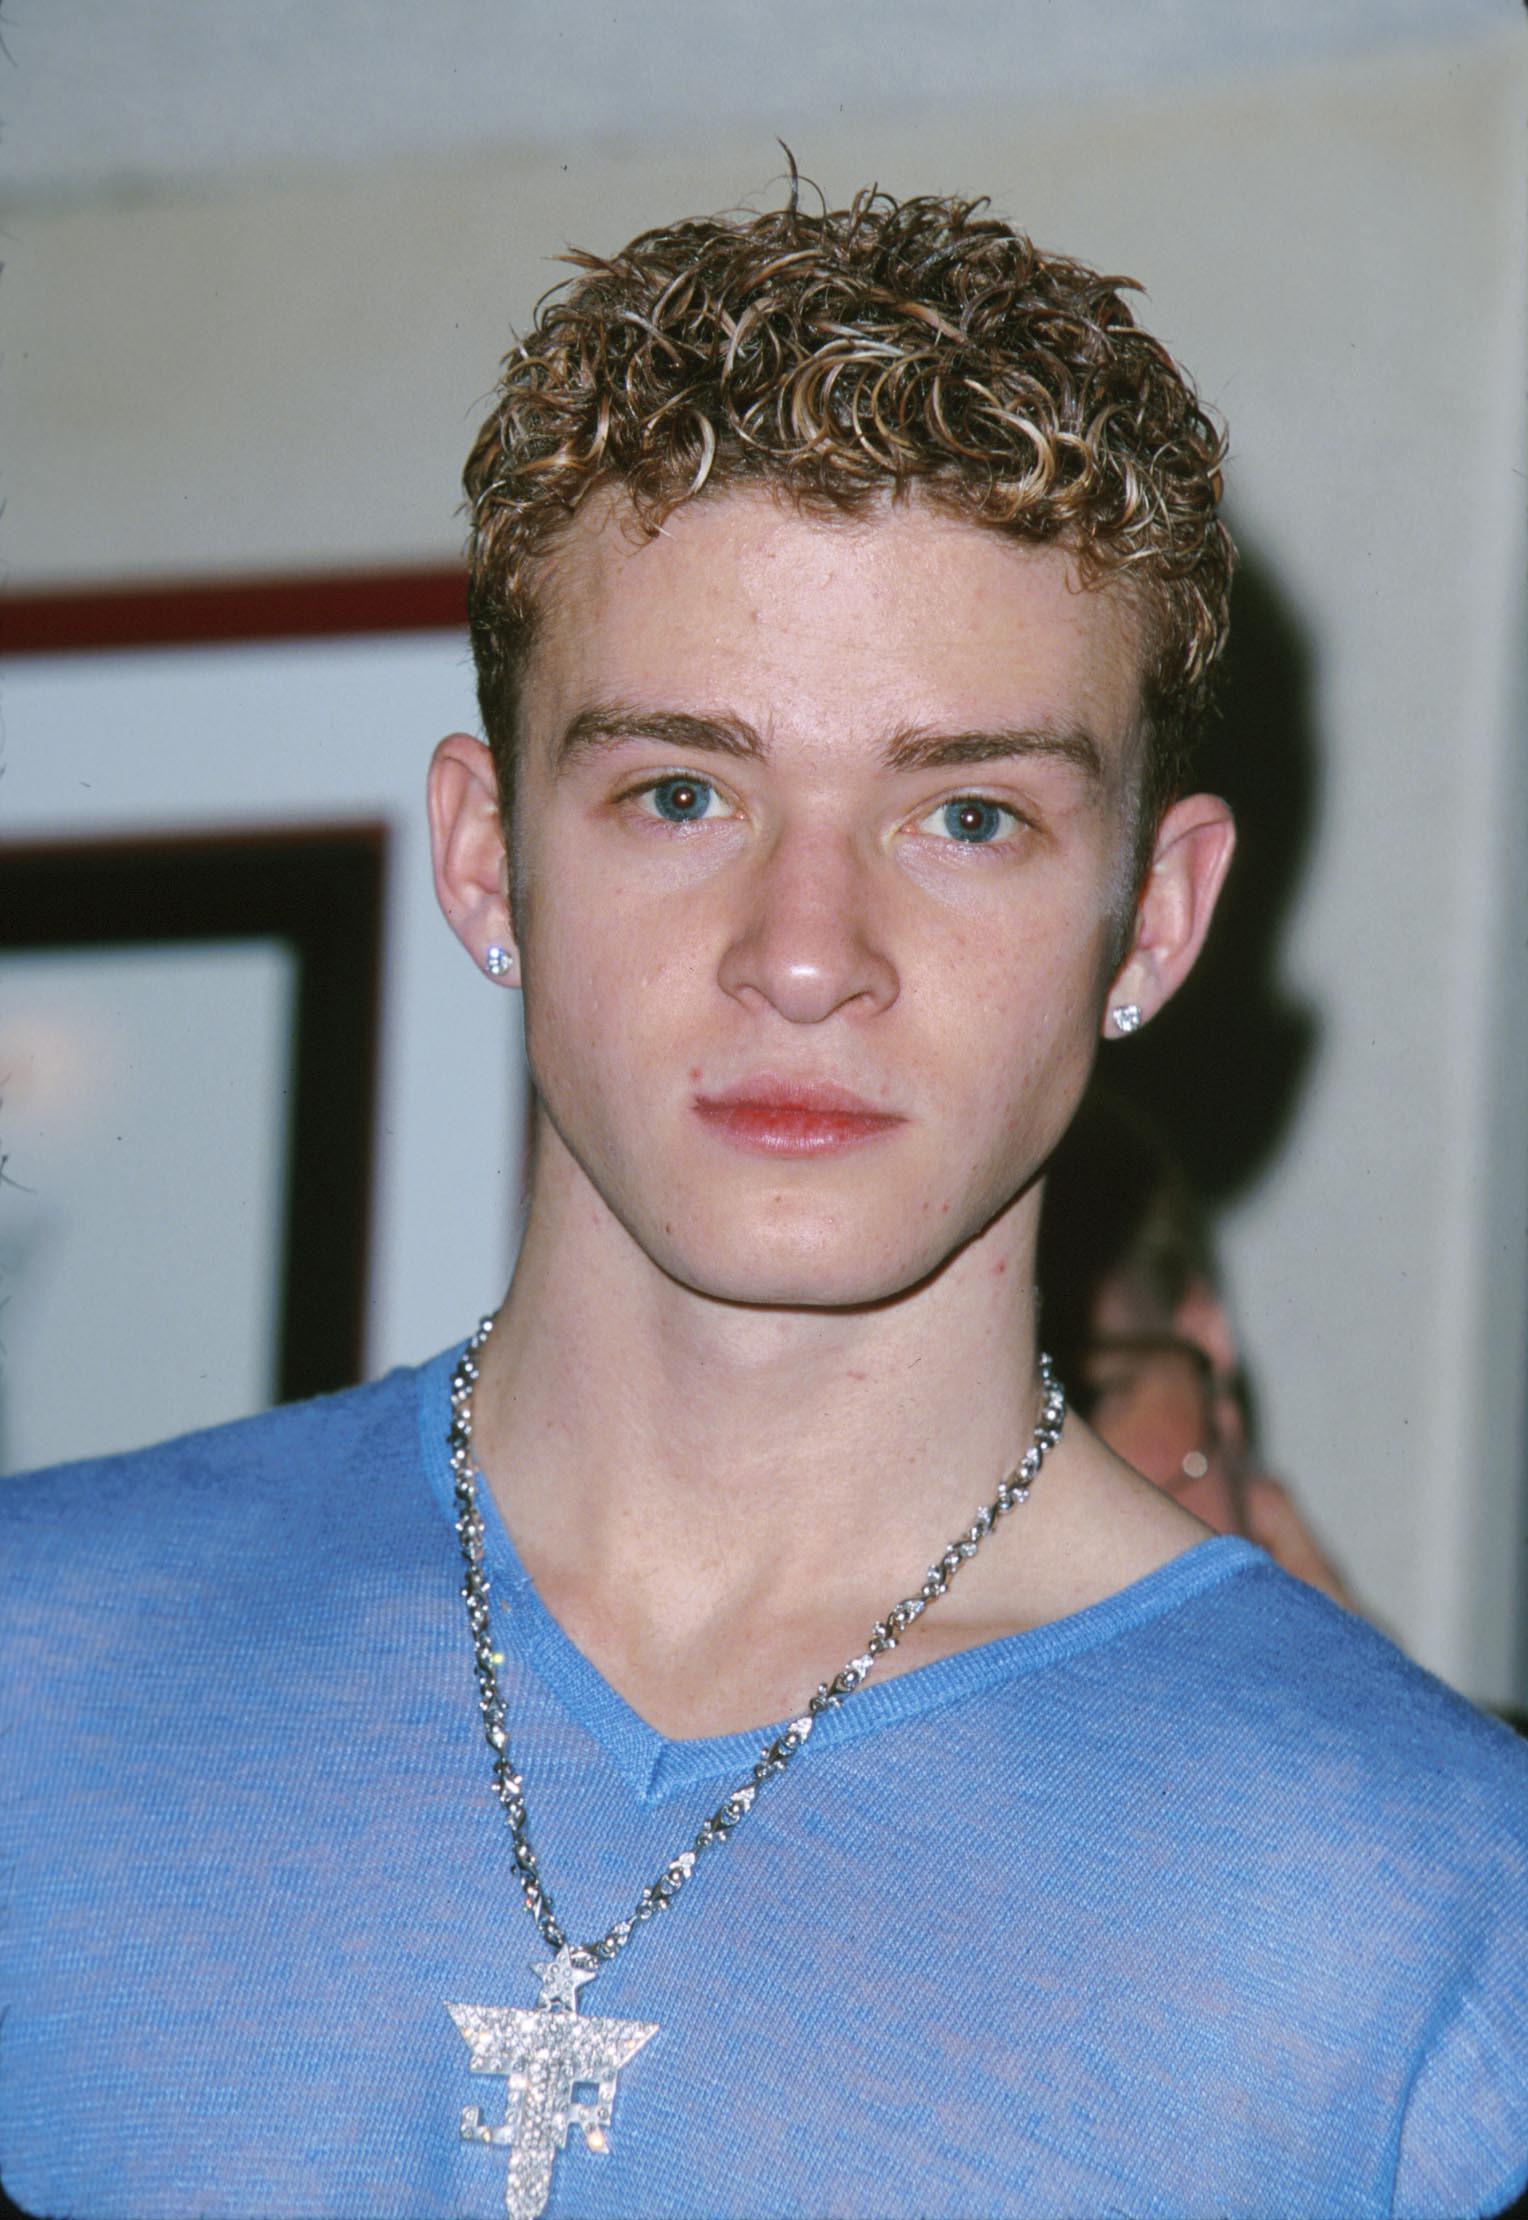 JT Time Travel—Old School Justin Pics You Have to See